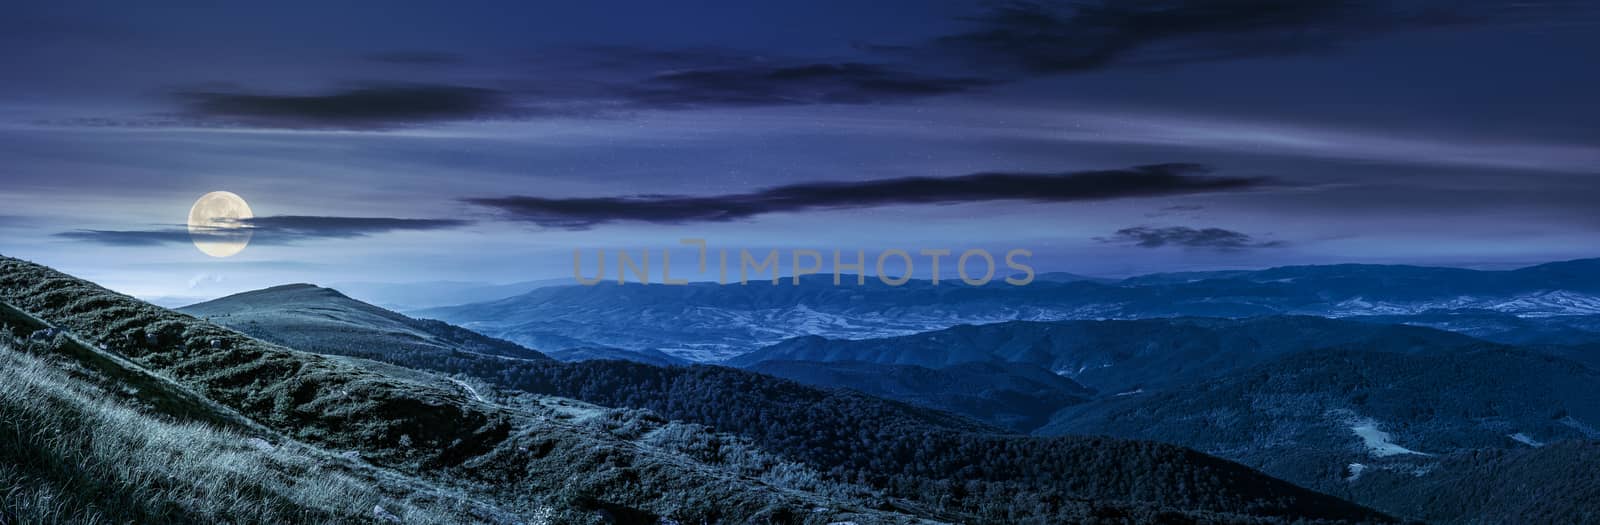 hillside panorama in Carpathian mountains at night by Pellinni